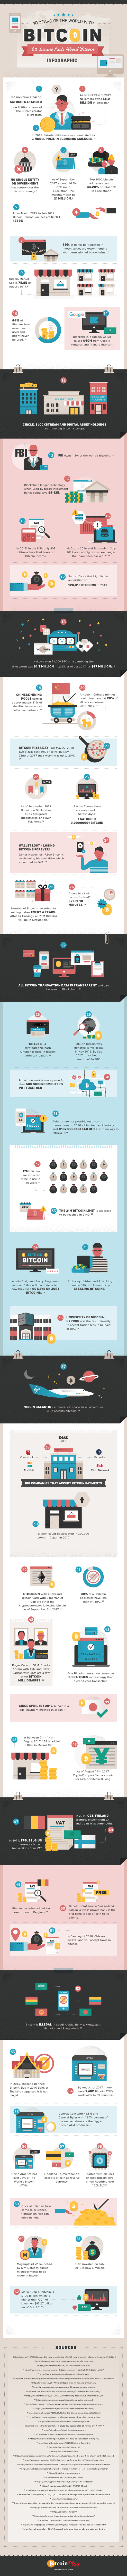 Infographic courtesy of Bitcoin Play